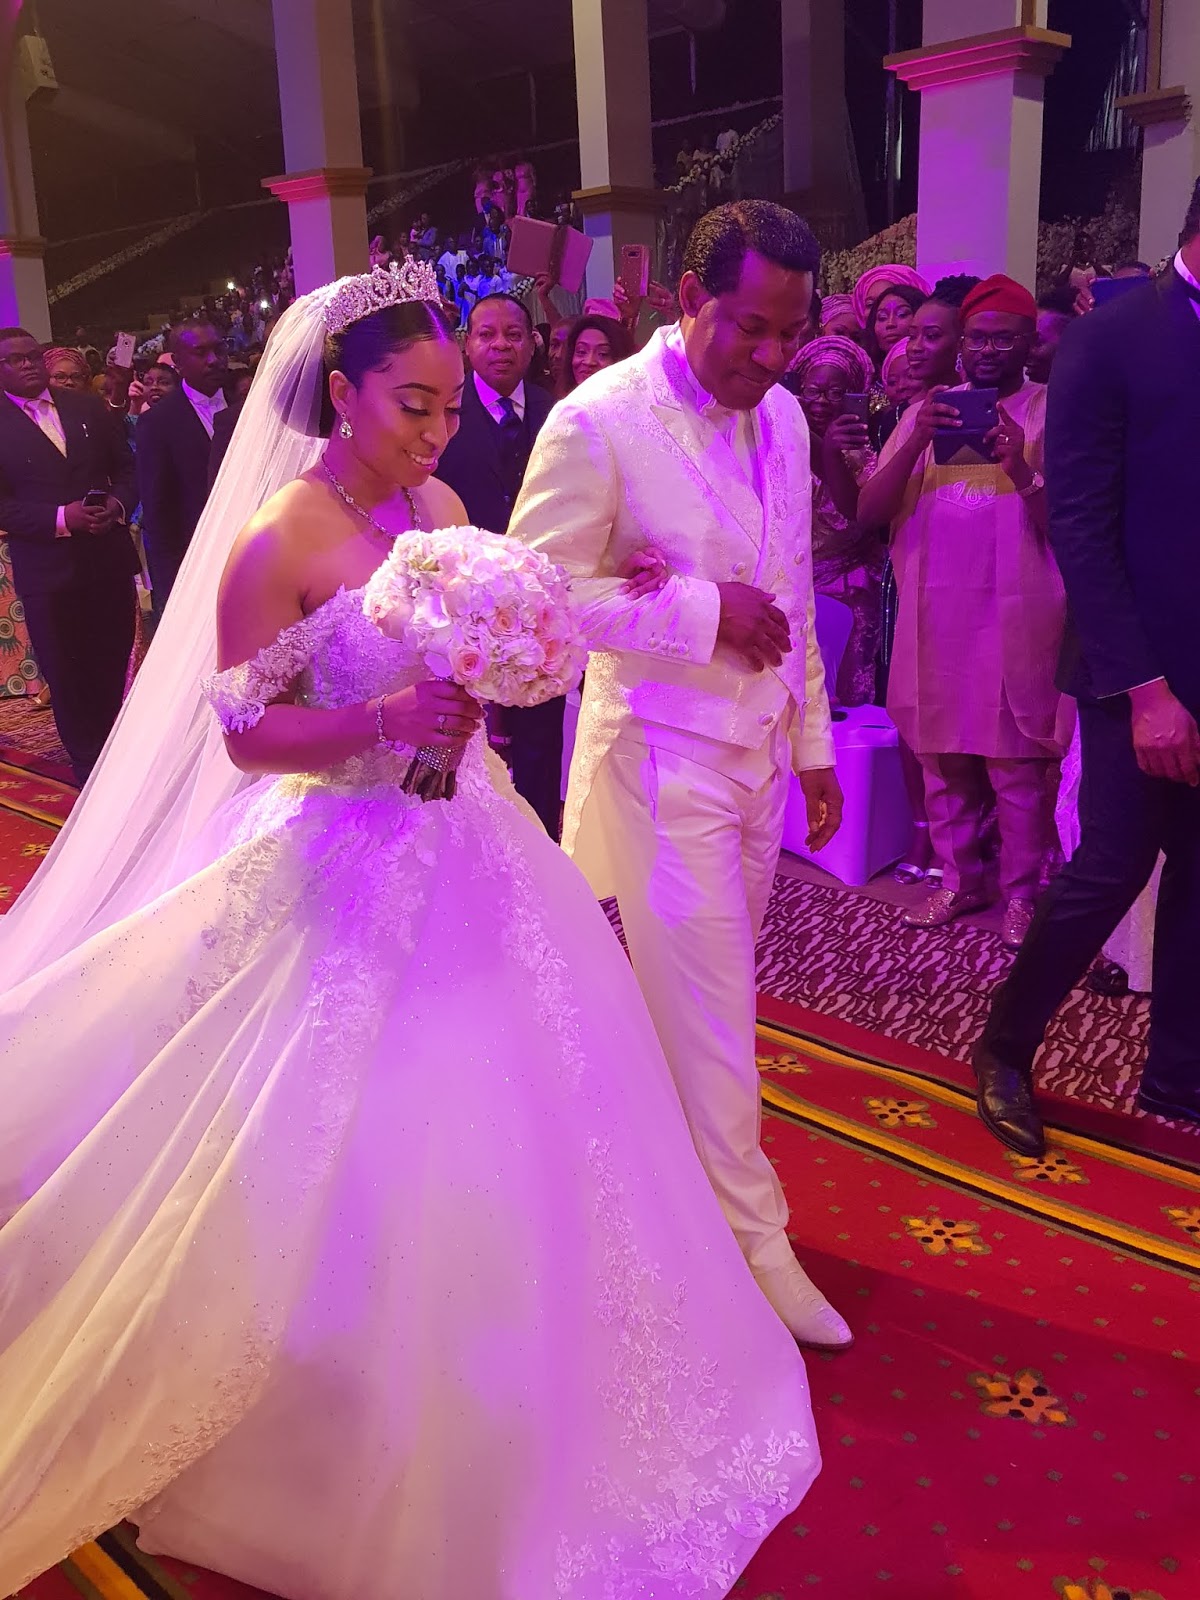 First photos from the church wedding of Pastor Chris ...